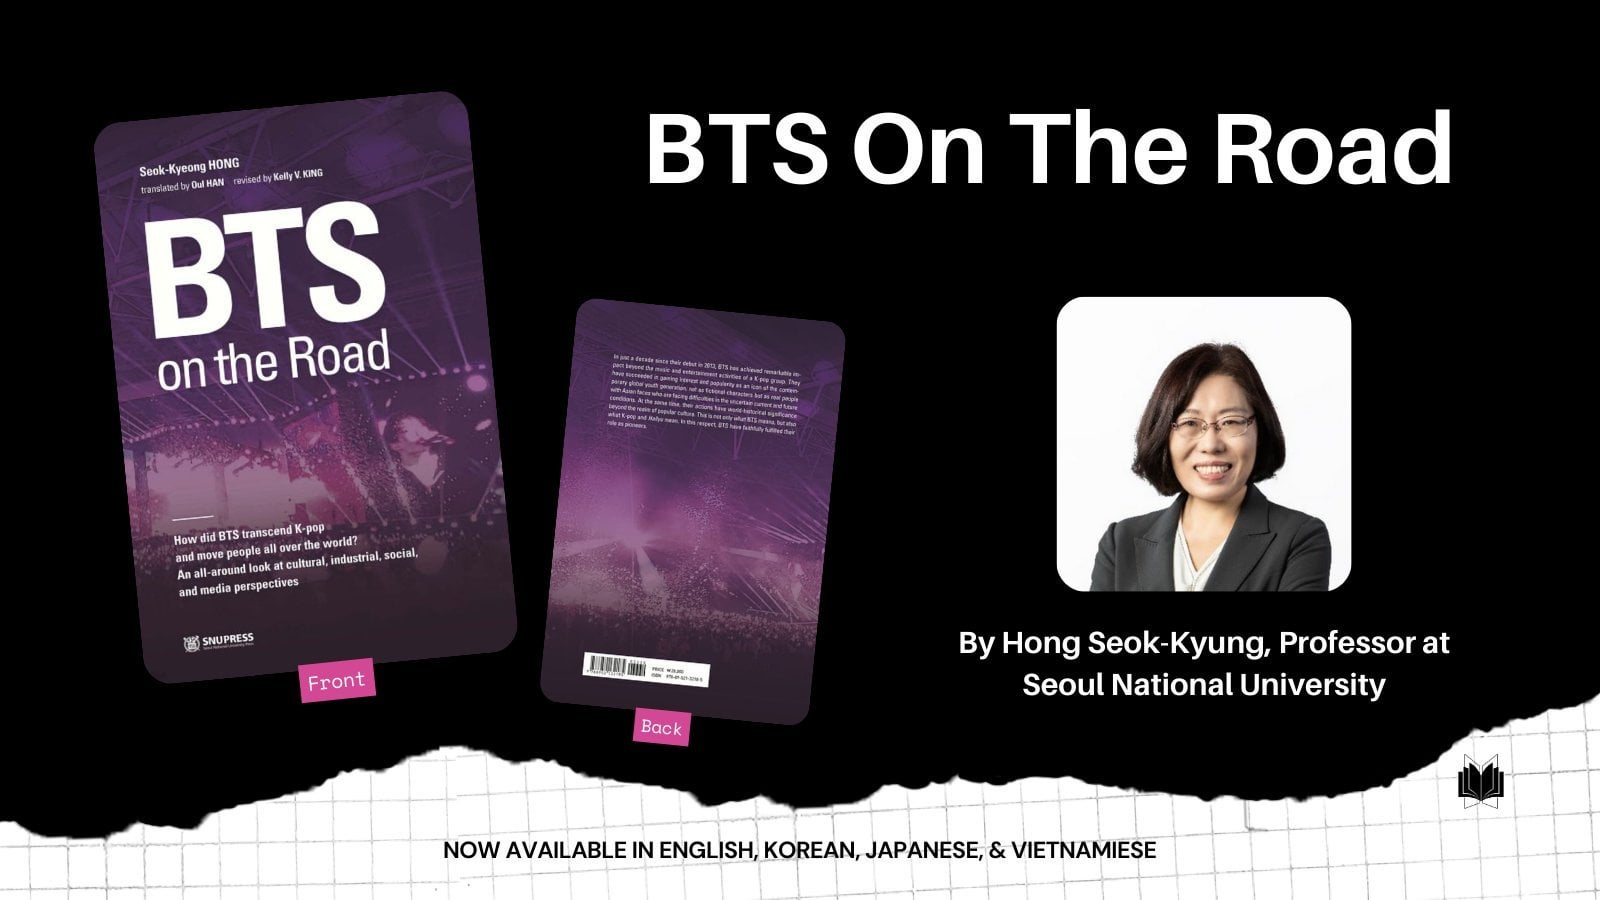 231117 Hong Seok-Kyung, a Prof. of Comms. at Seoul National Univ. released a book titled, "BTS On the Road" (research supported by Hybe)